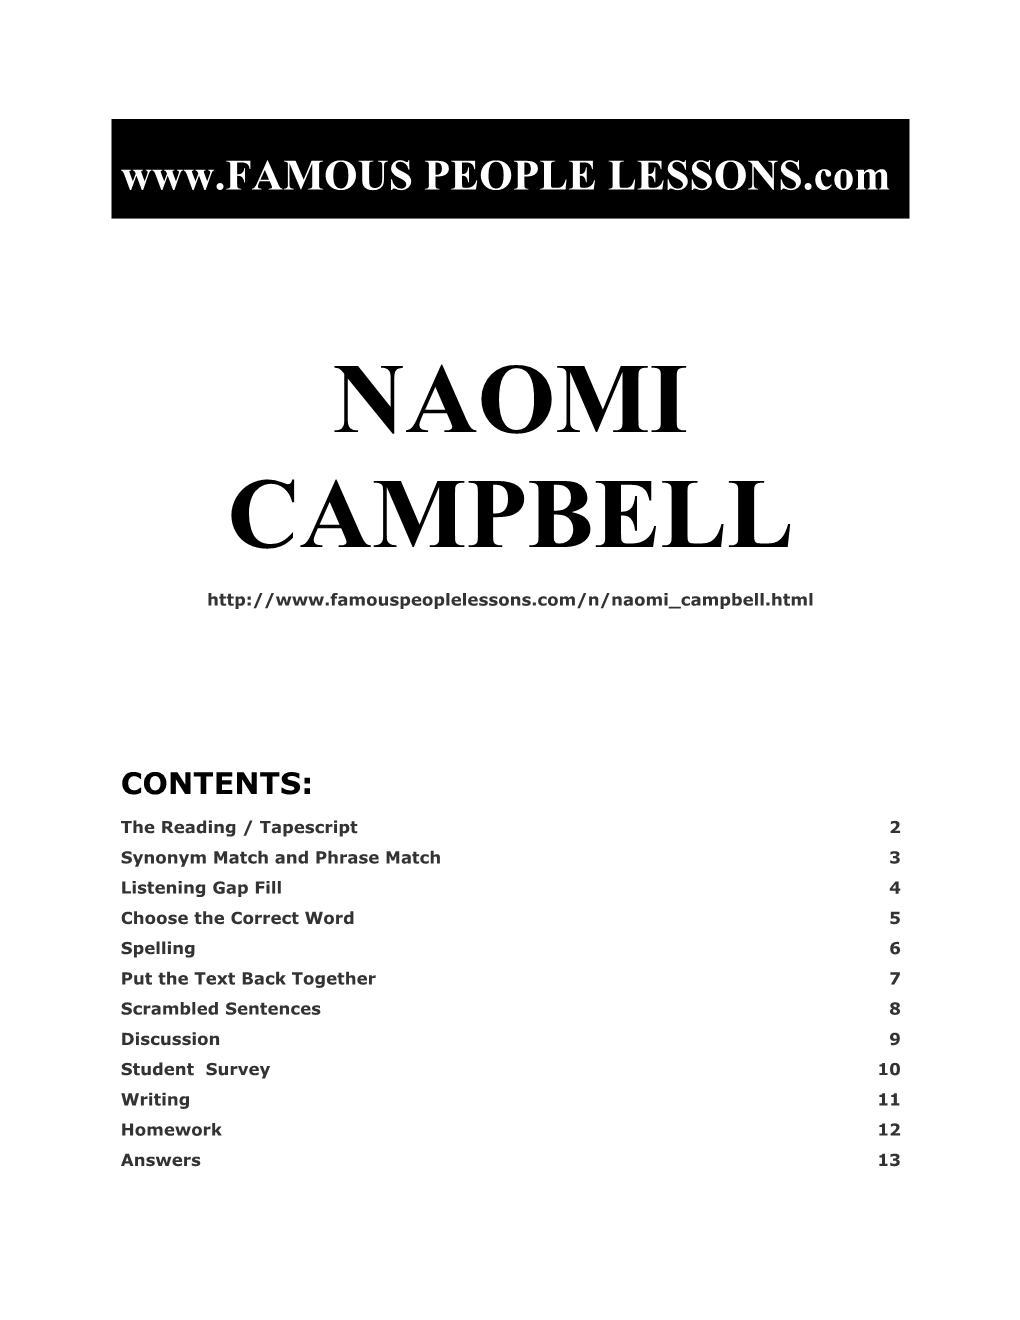 Famous People Lessons - Naomi Campbell